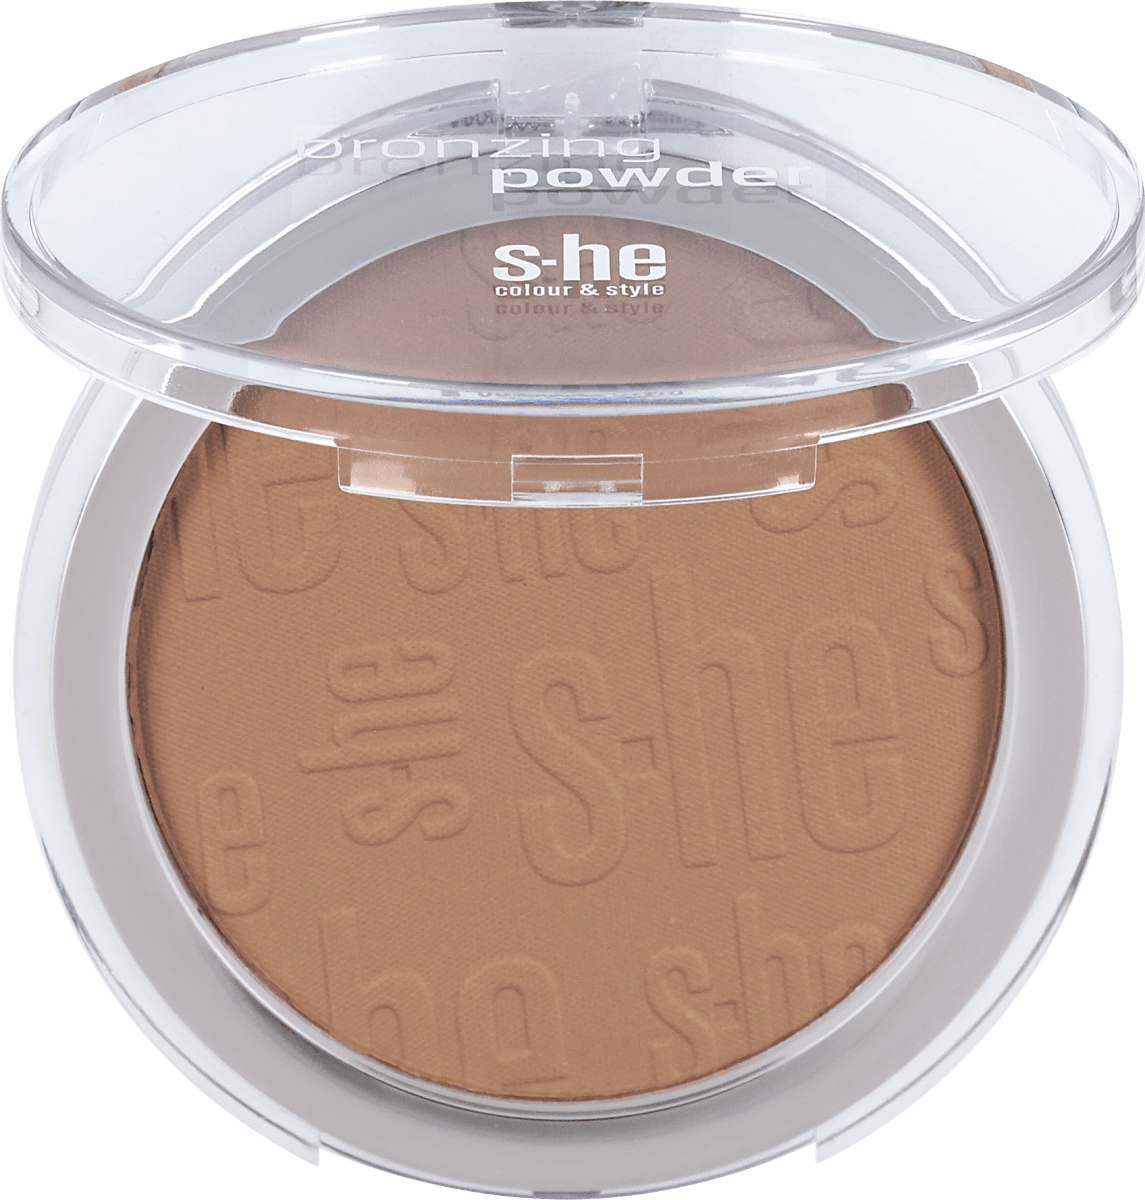 Bronzing 176/402, g s-he Puder colour&style 9